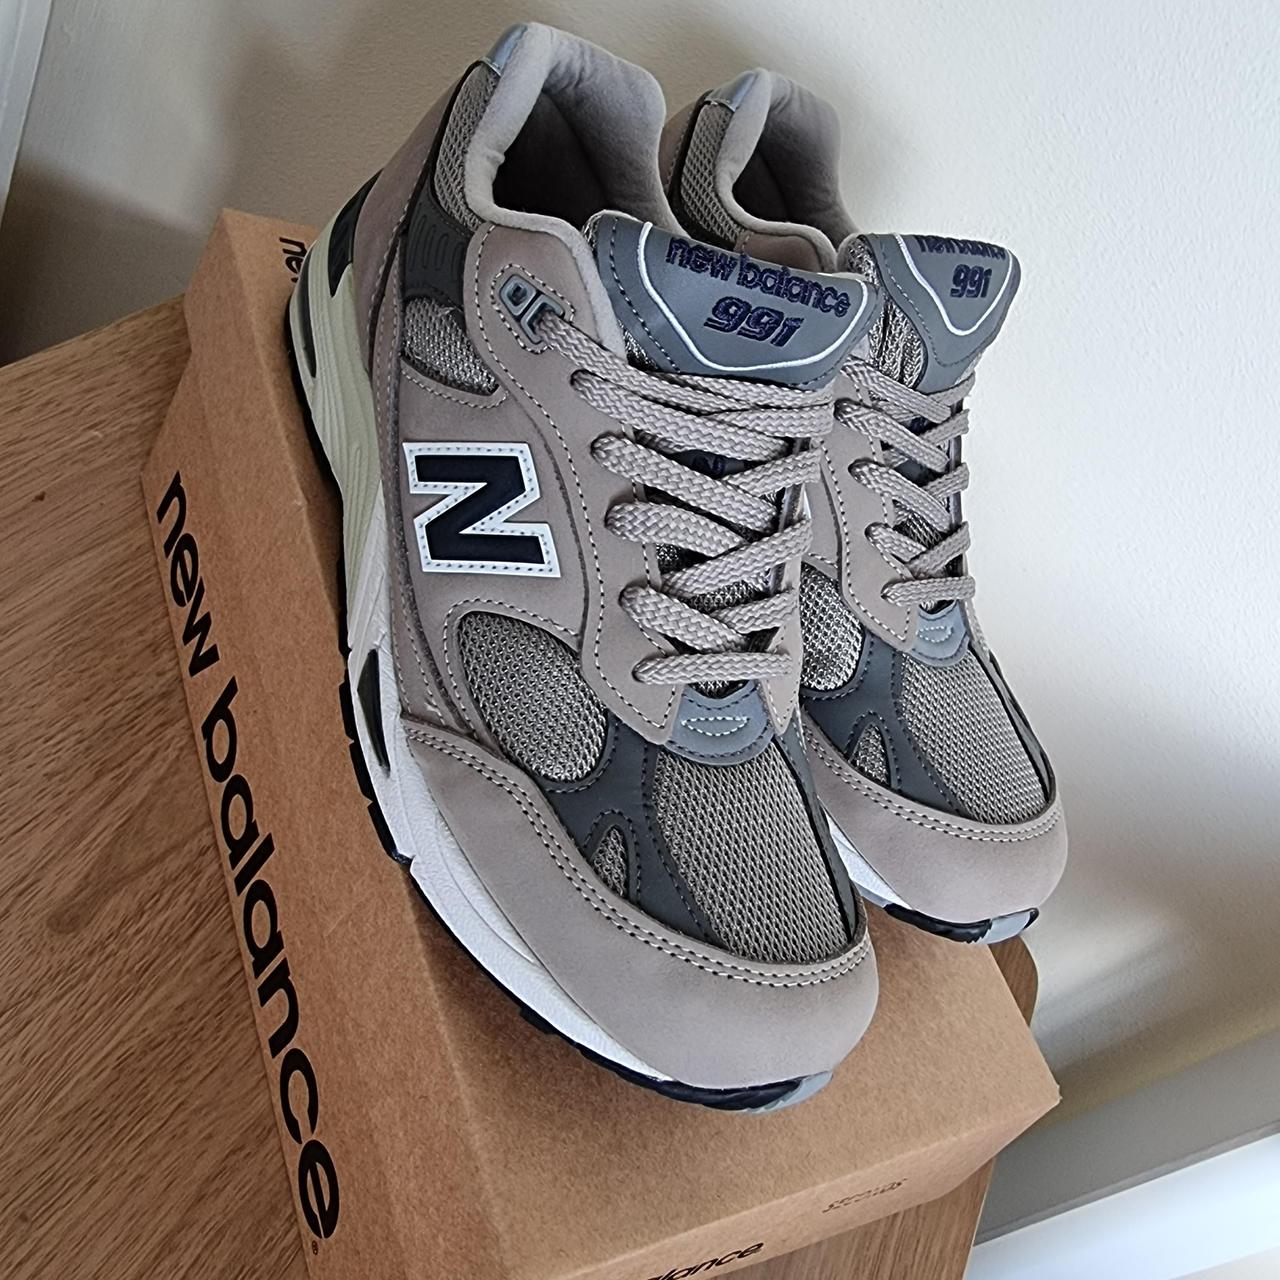 New balance 991v2 20th anniversary MADE IN THE UK.... - Depop